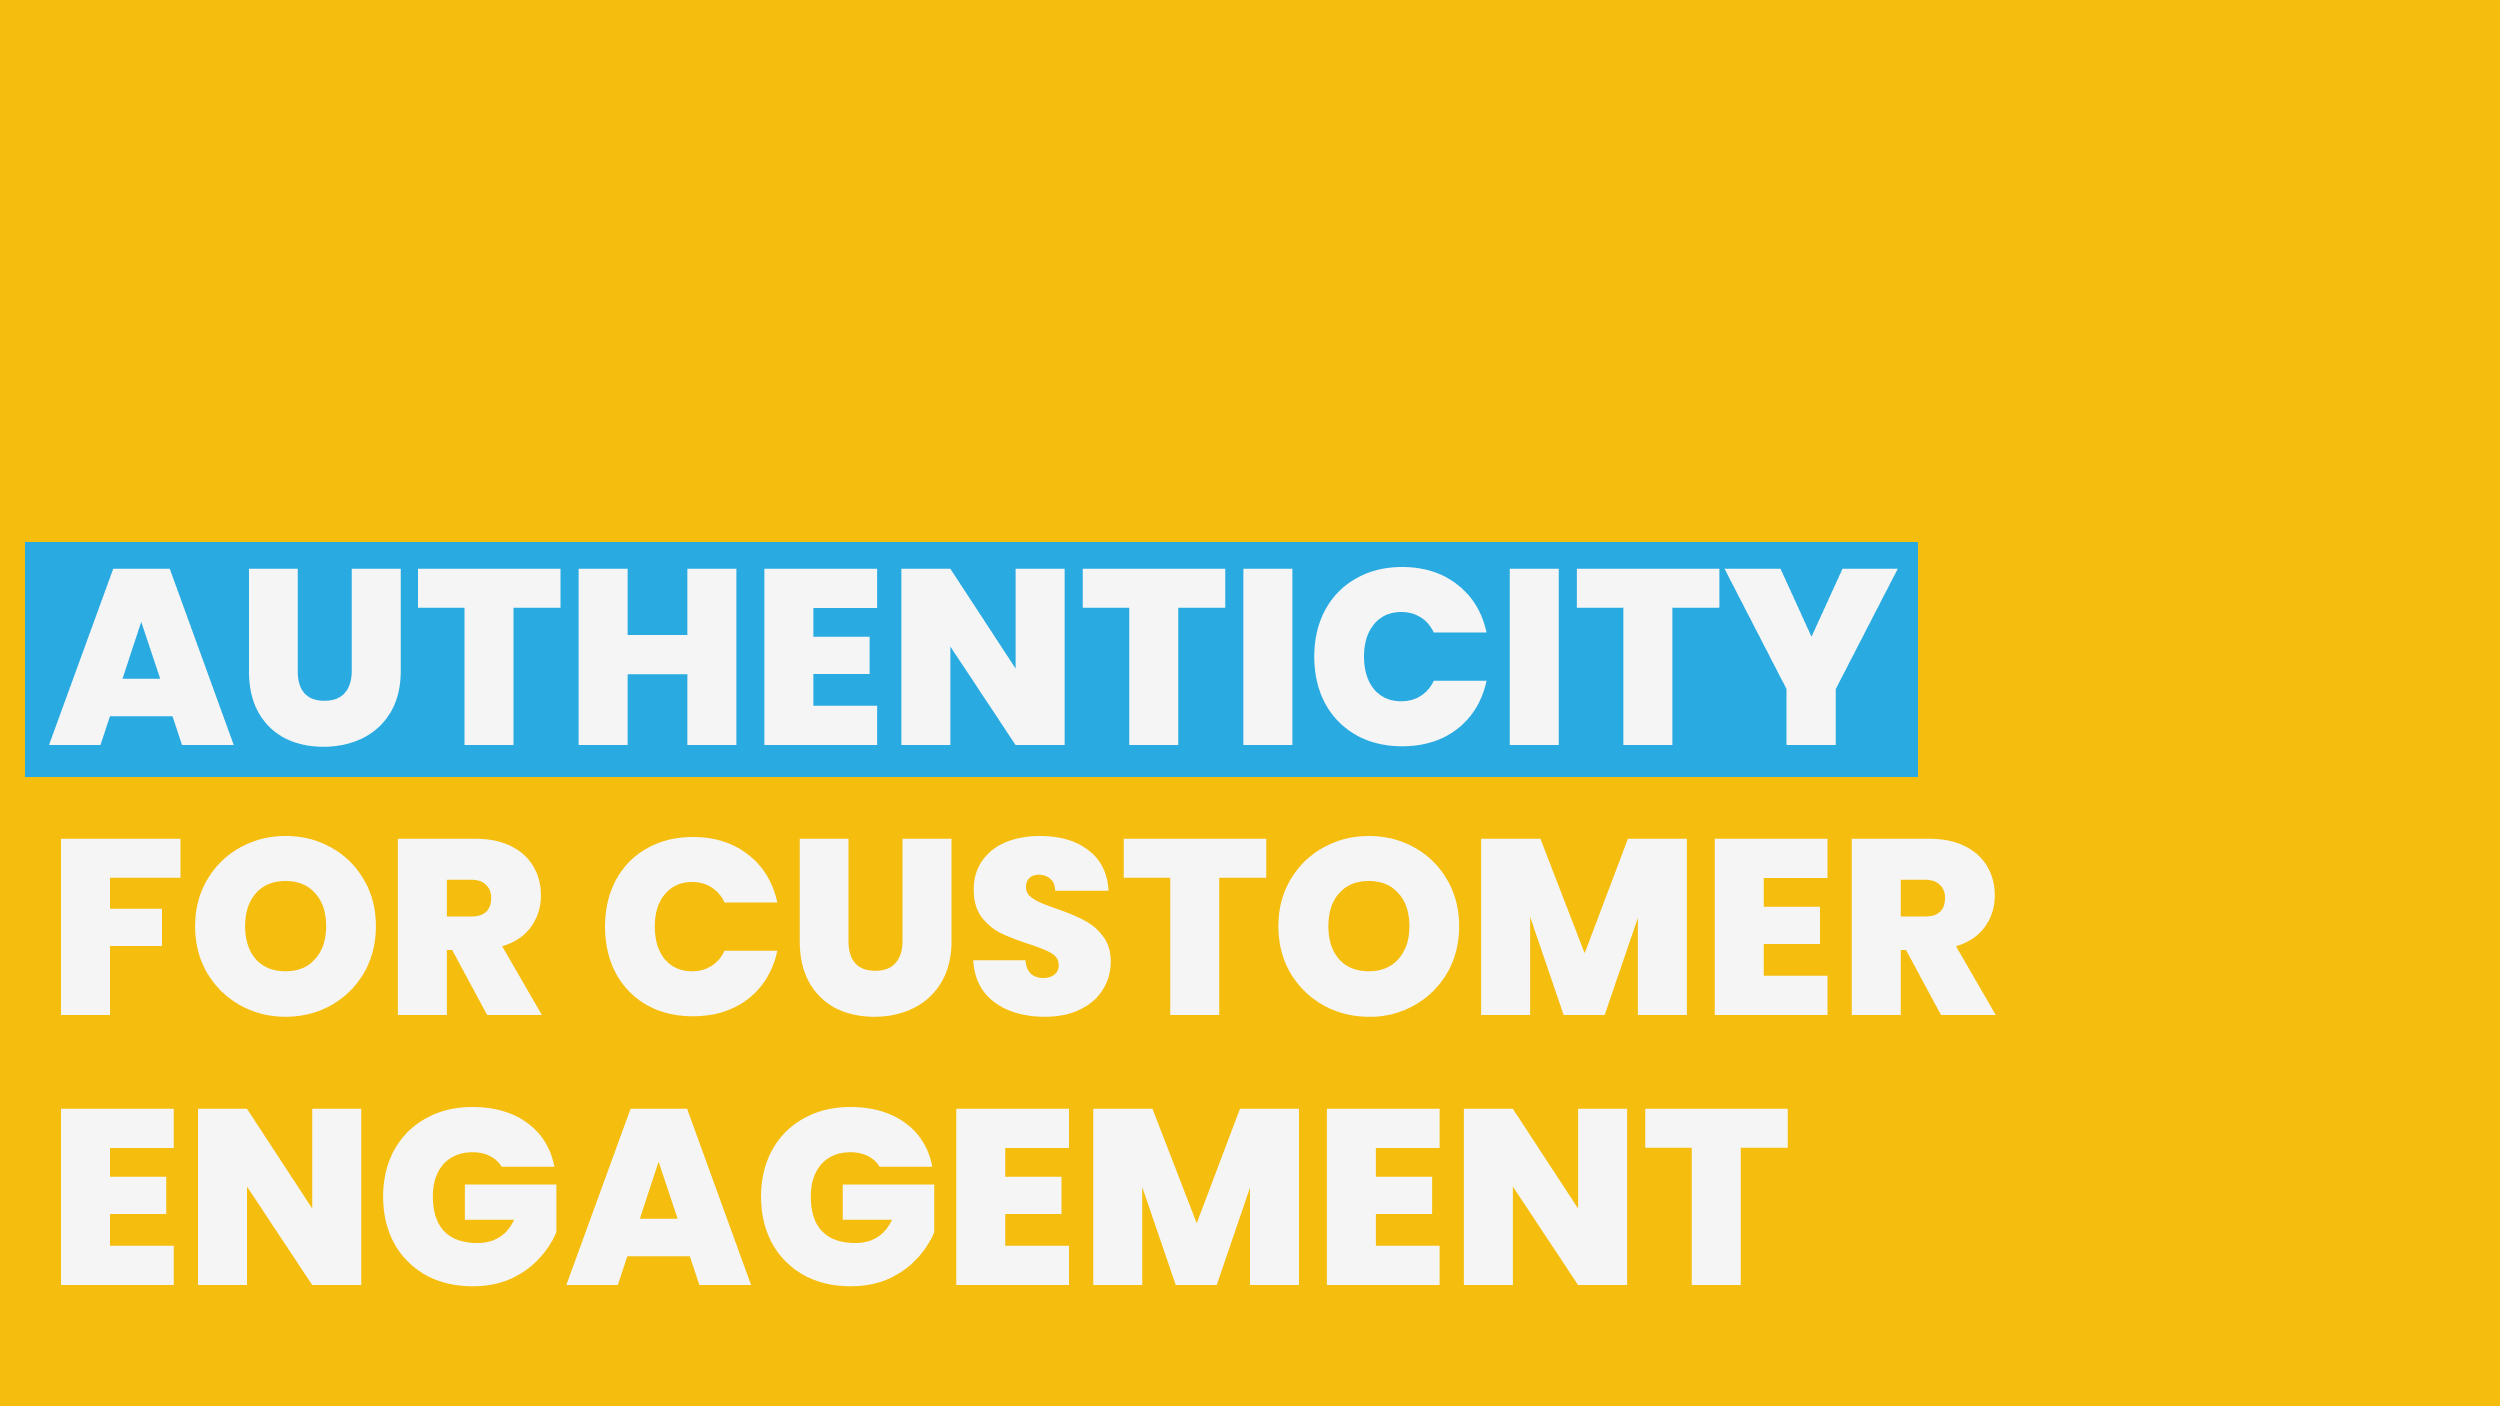 7 Key Practices for Building Brand Authenticity with Data-Driven Insights